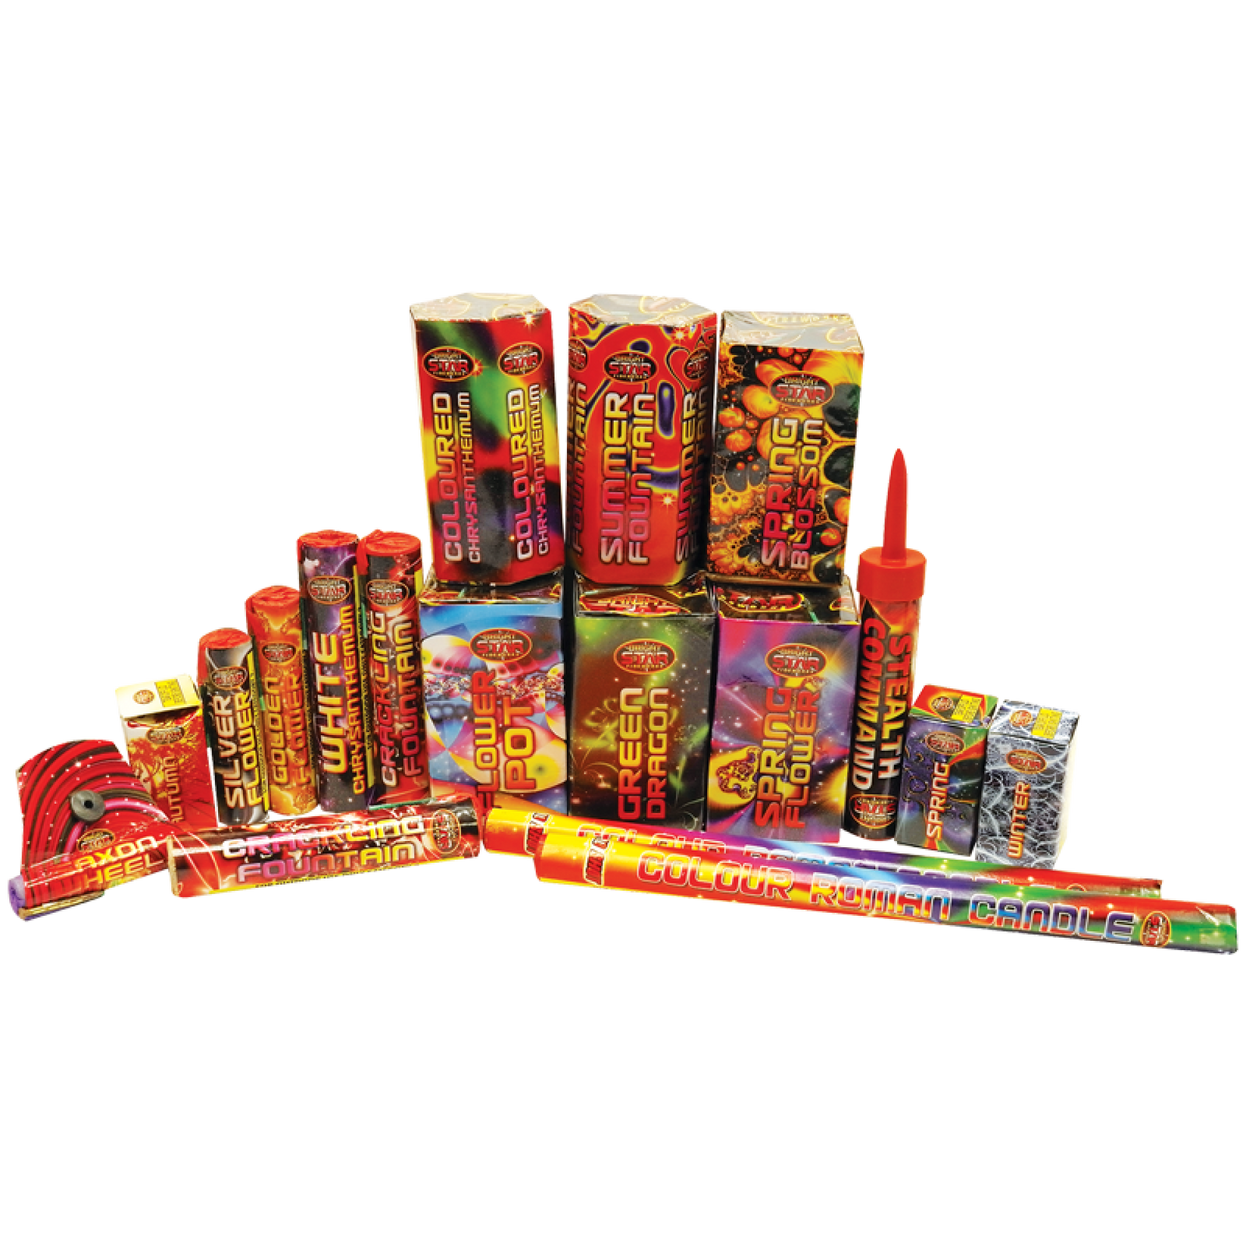 Family Selection Box 18pce By Bright Star Fireworks - BUY 1 GET 1 FREE!